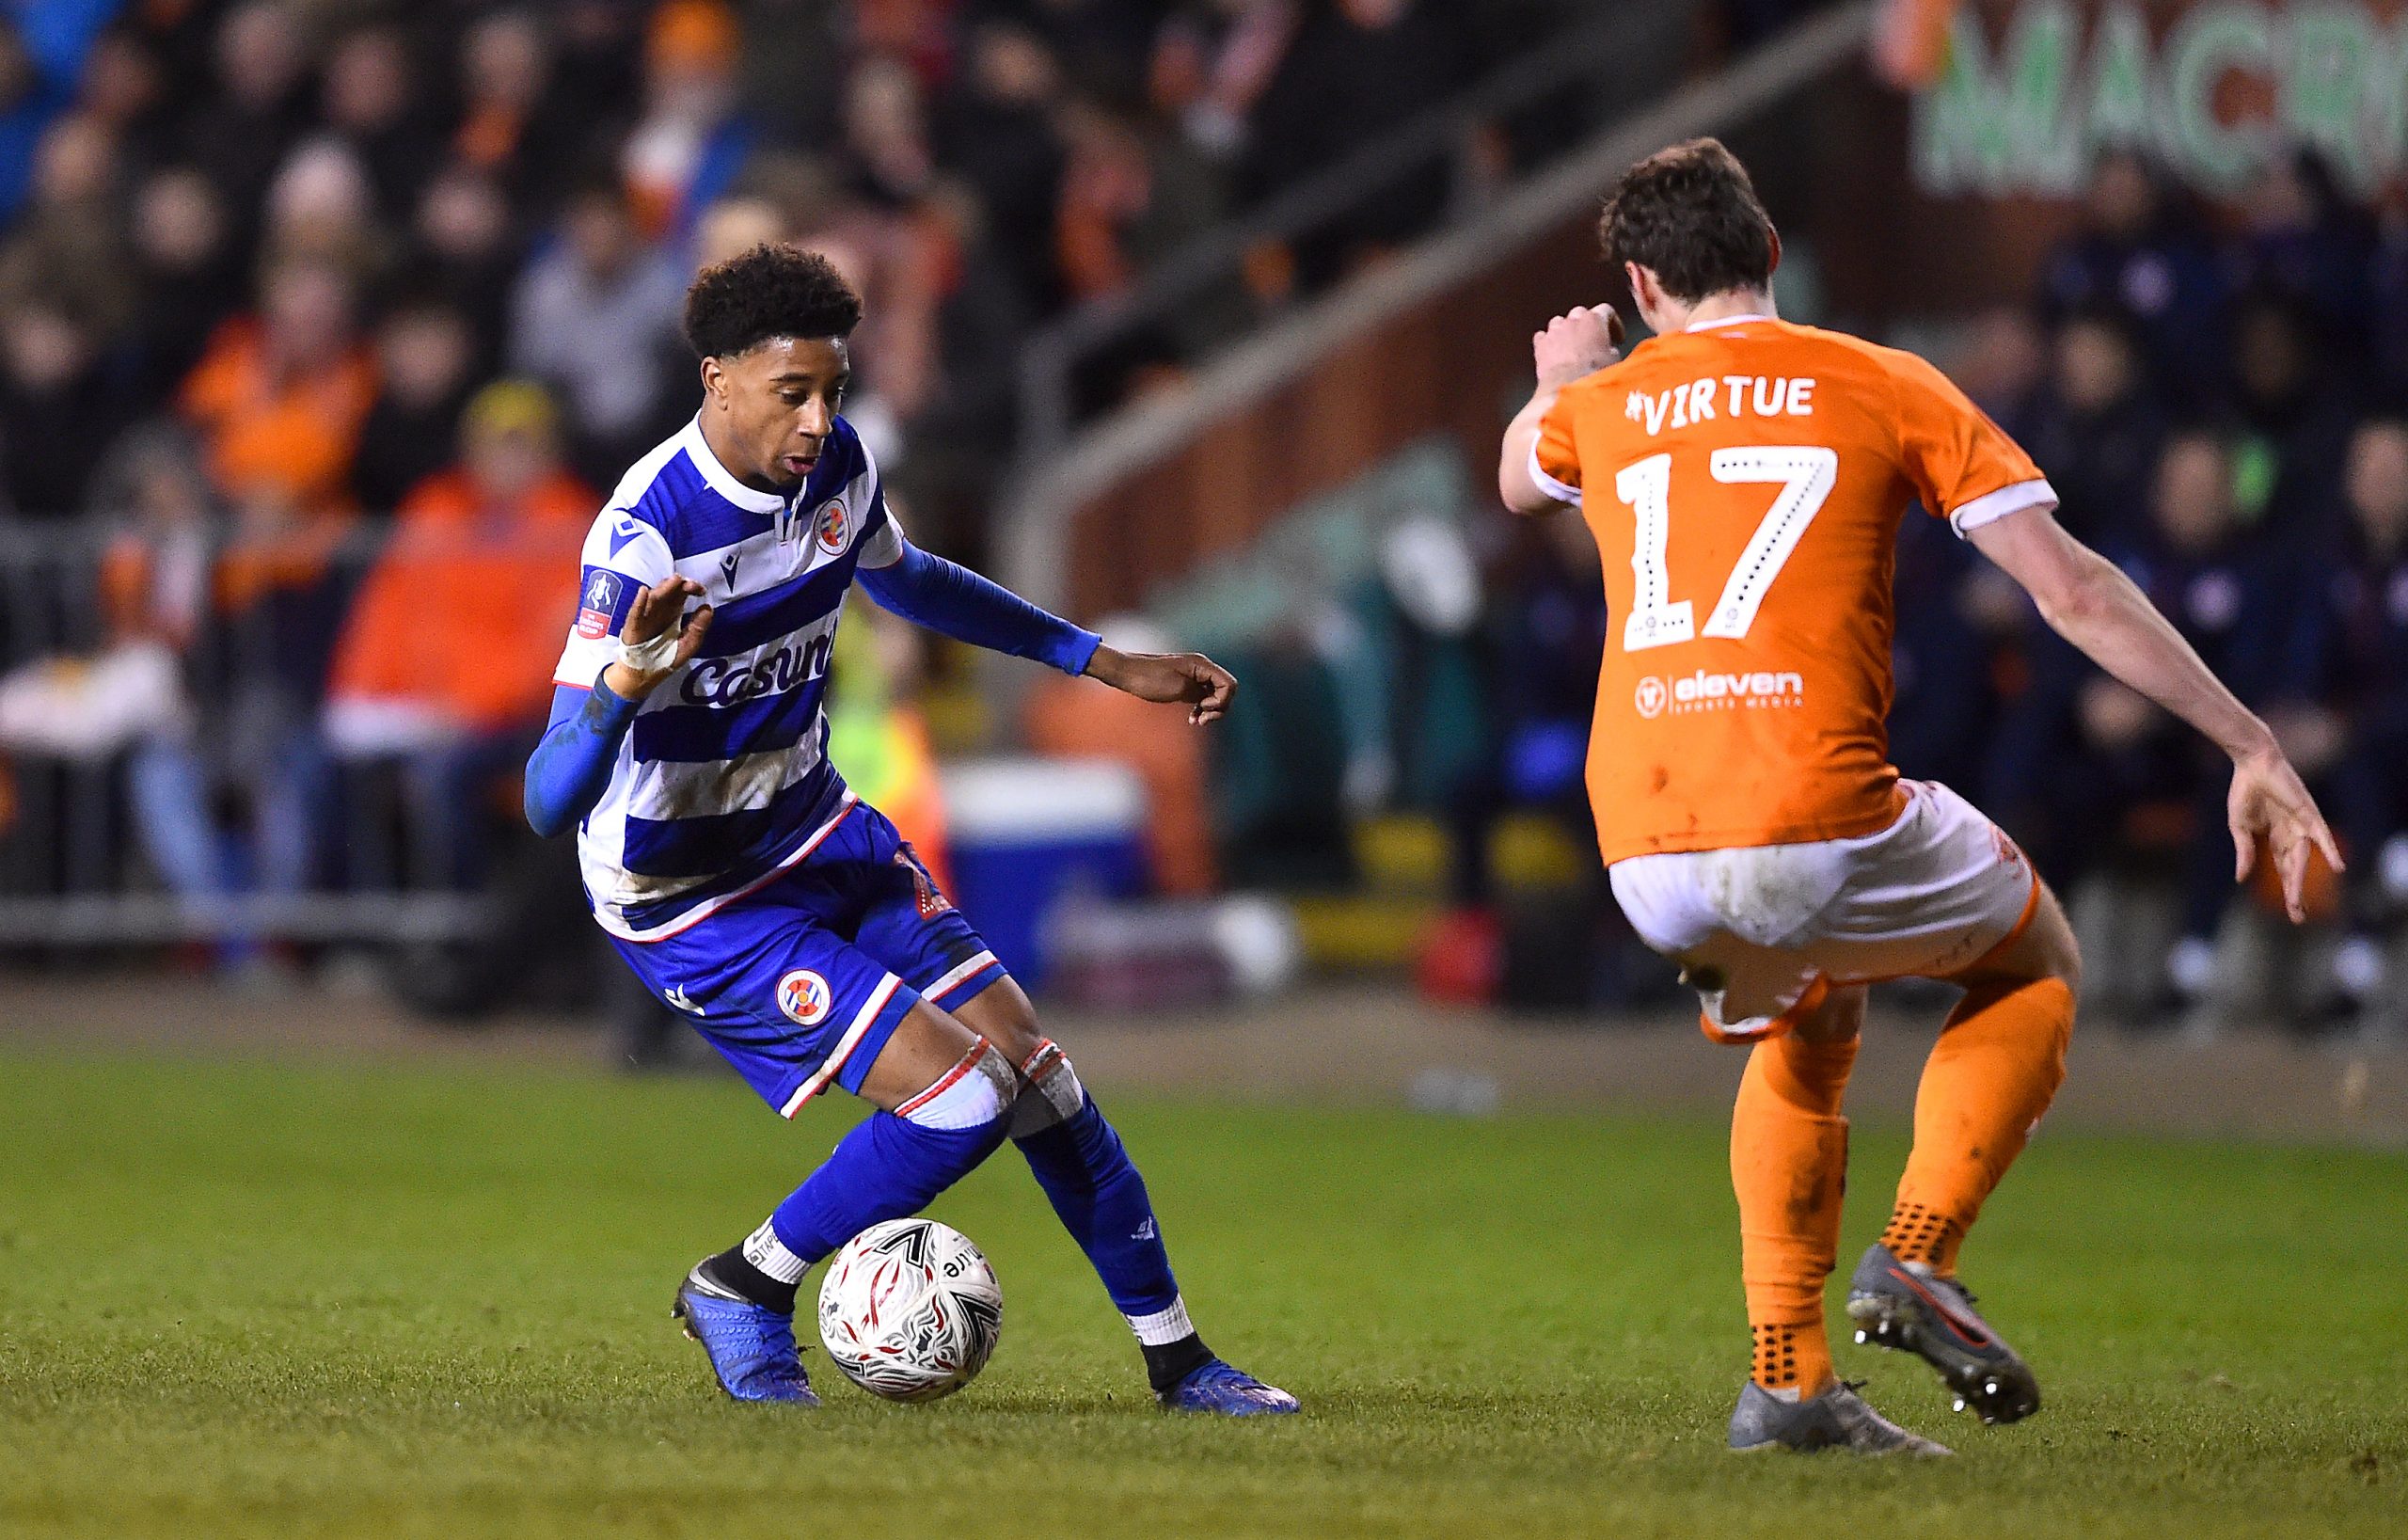 Aston Villa eyeing a move for Michael Olise who is in action in the picture